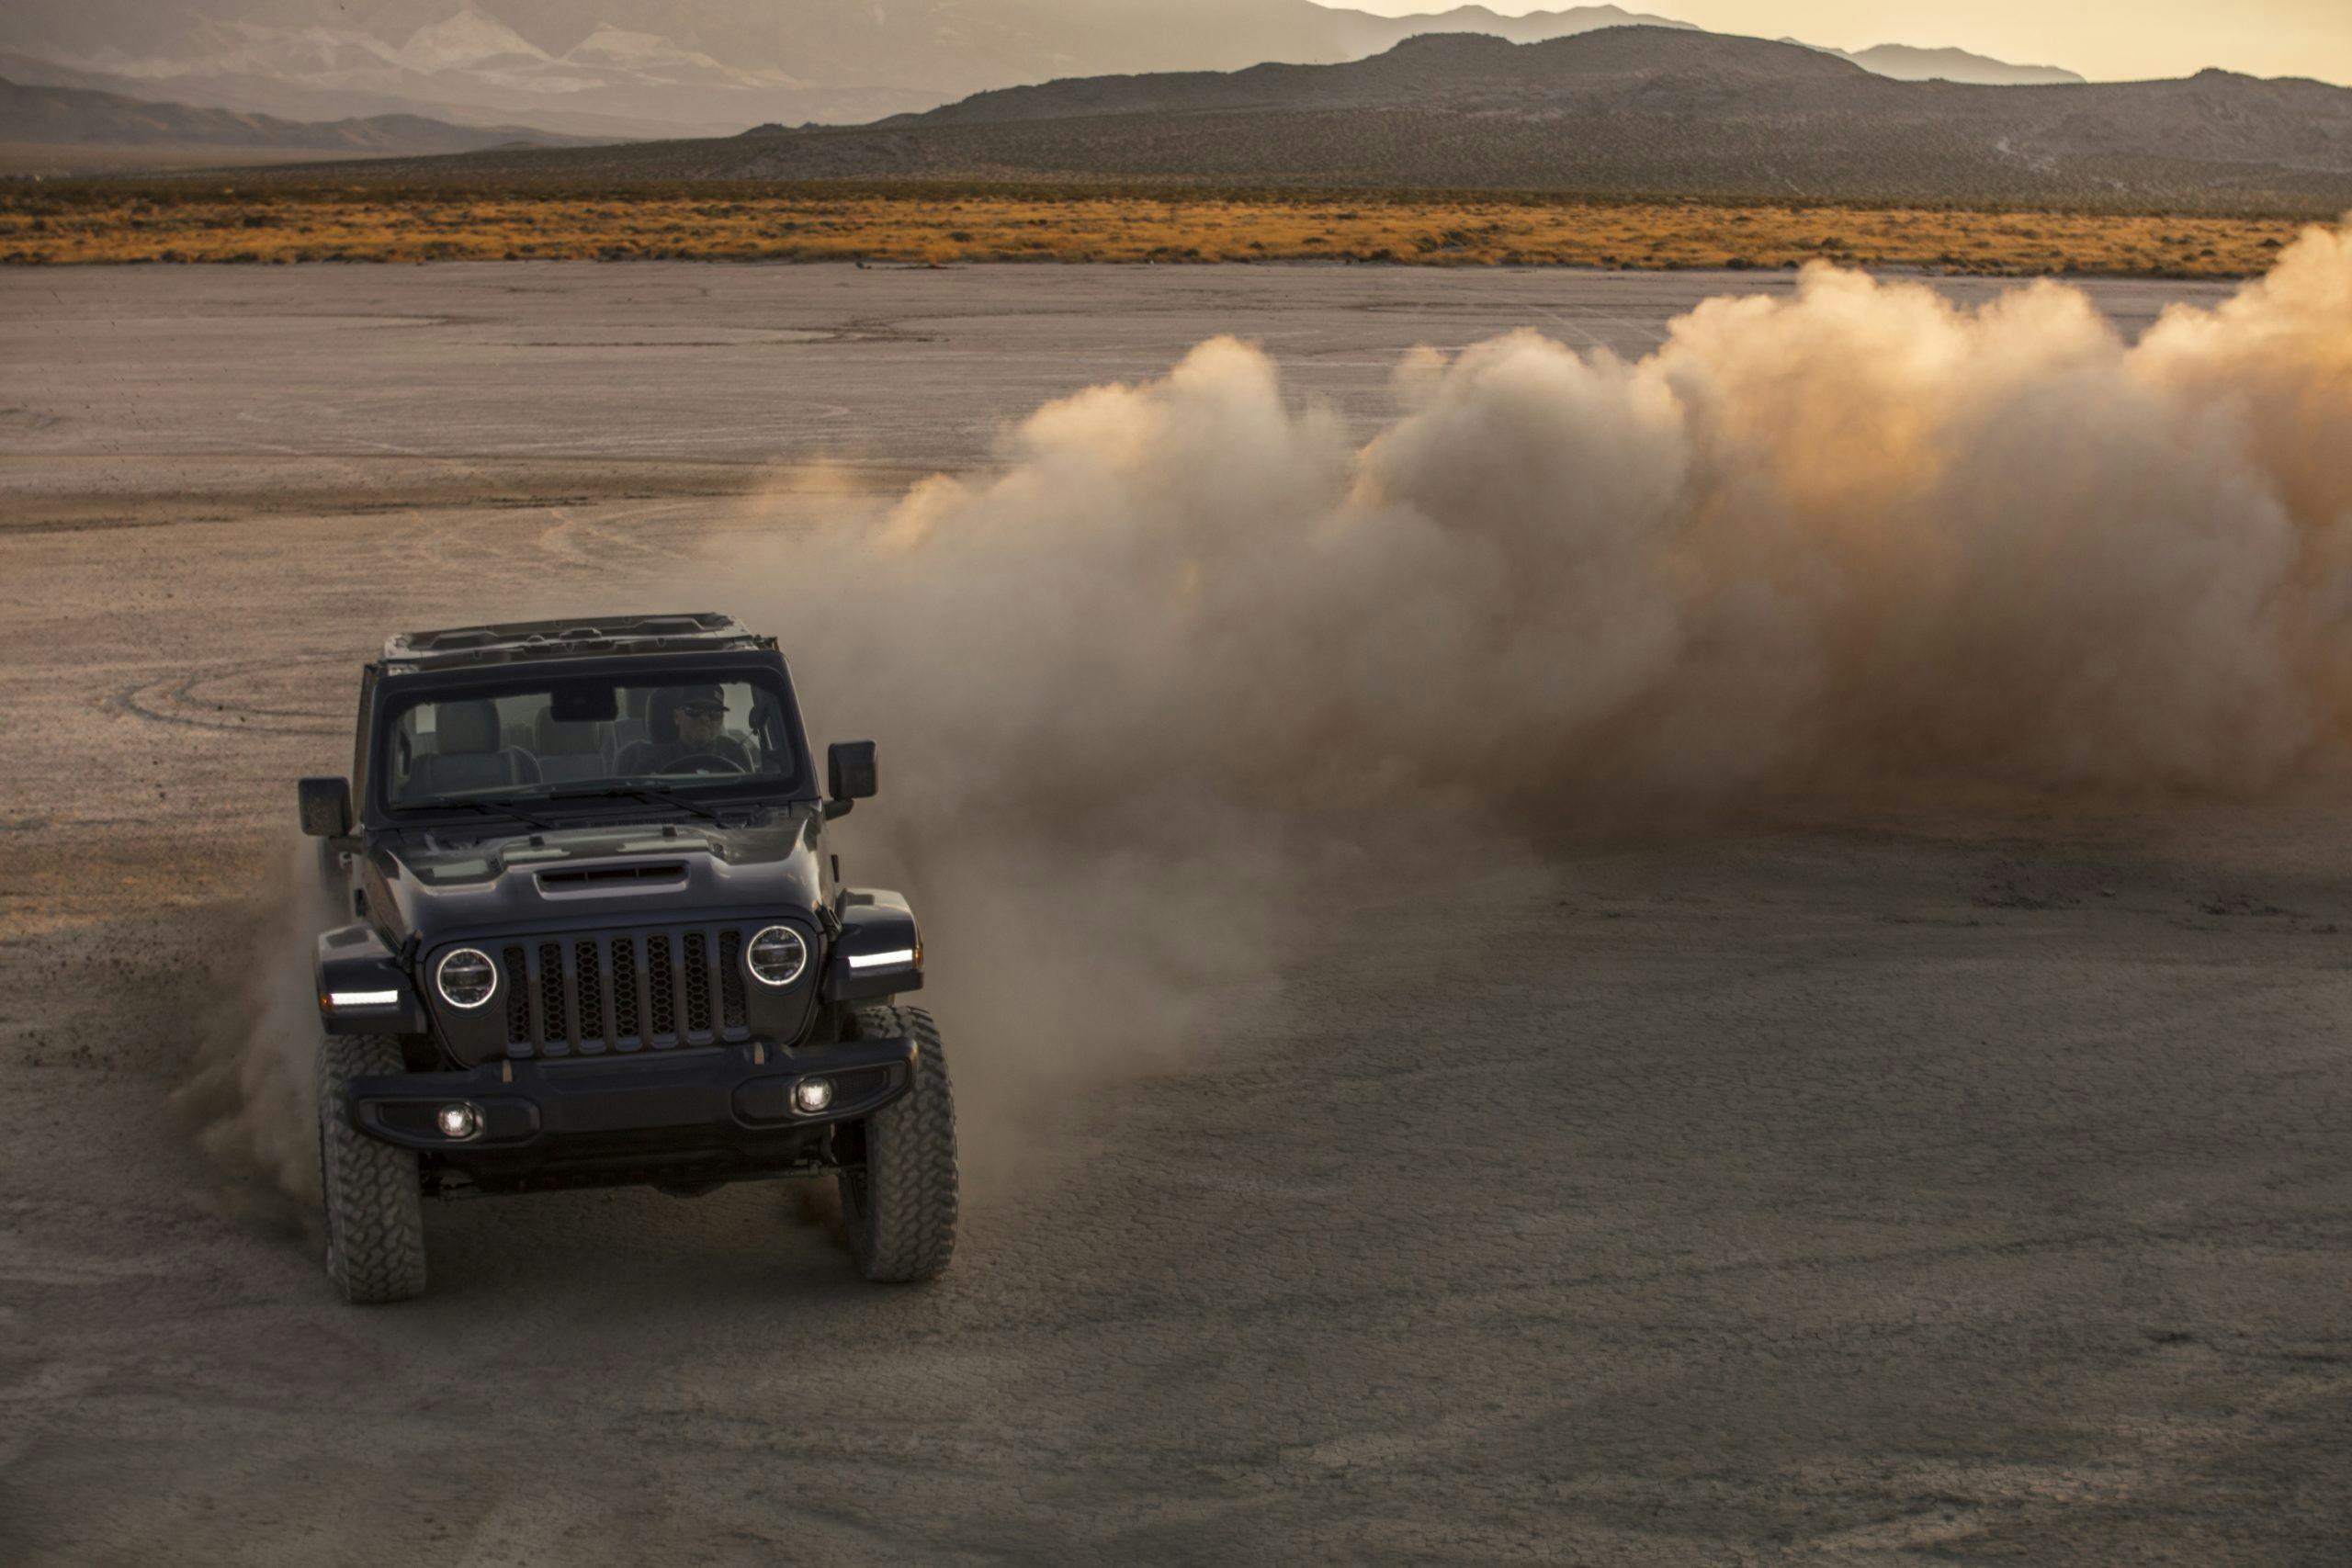 2021 Jeep Wrangler Rubicon 392 gray making dust clouds